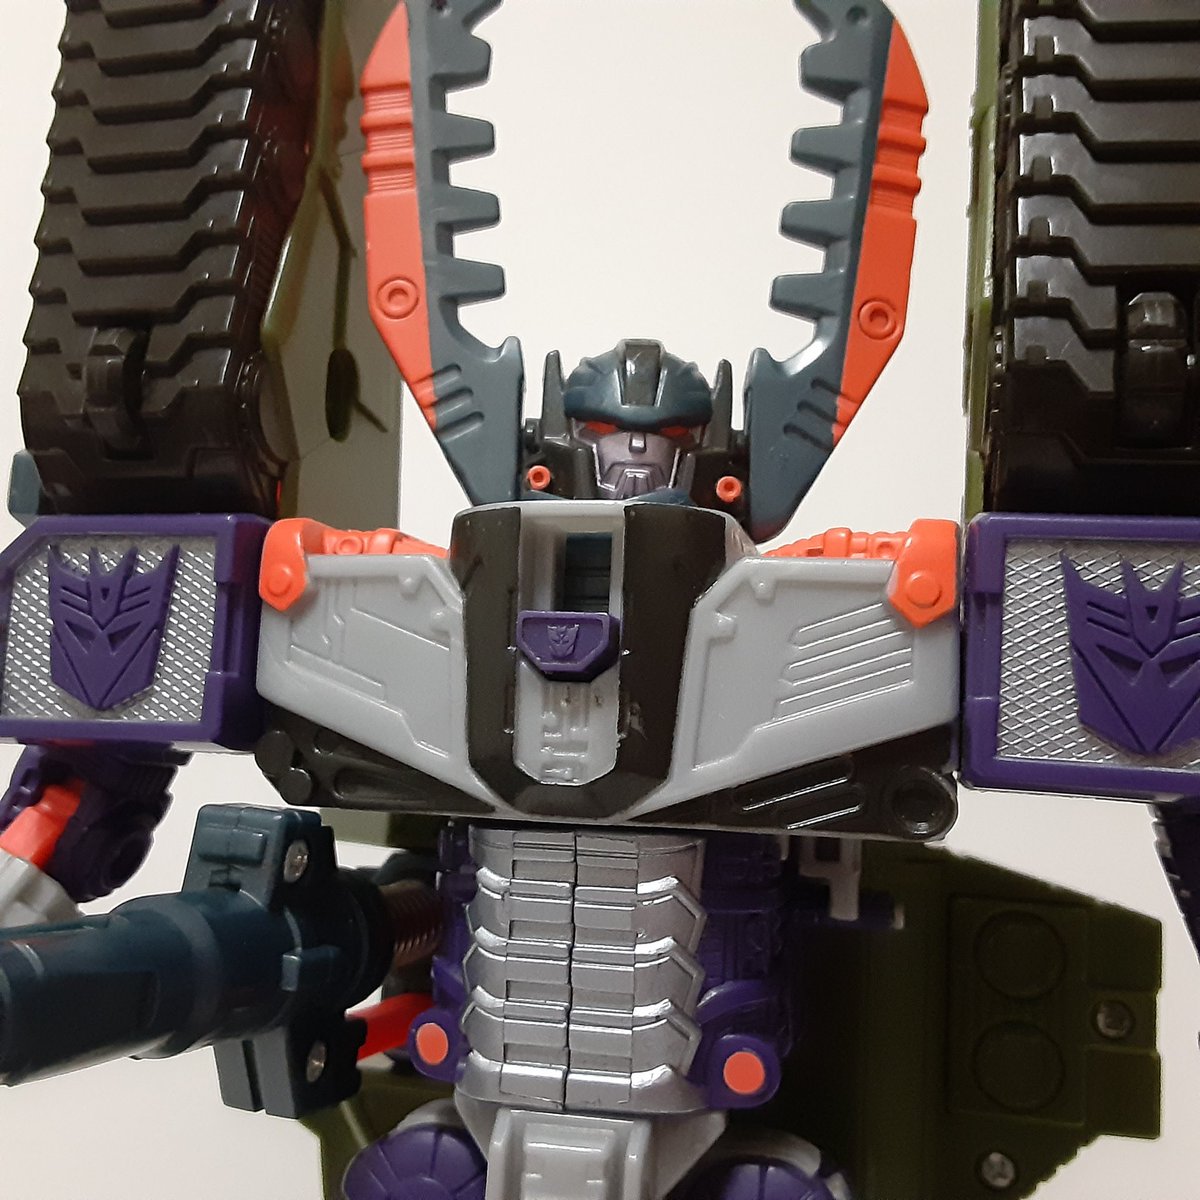 10/1Transformers Armada Megatron w/ Leader-1 (Ultra Class) 2002-2003.One of the first Transfomers I ever owned, and still has such a presence.I once brought it into class, back in art school, where one of my classmates described it as a "box of mysteries".